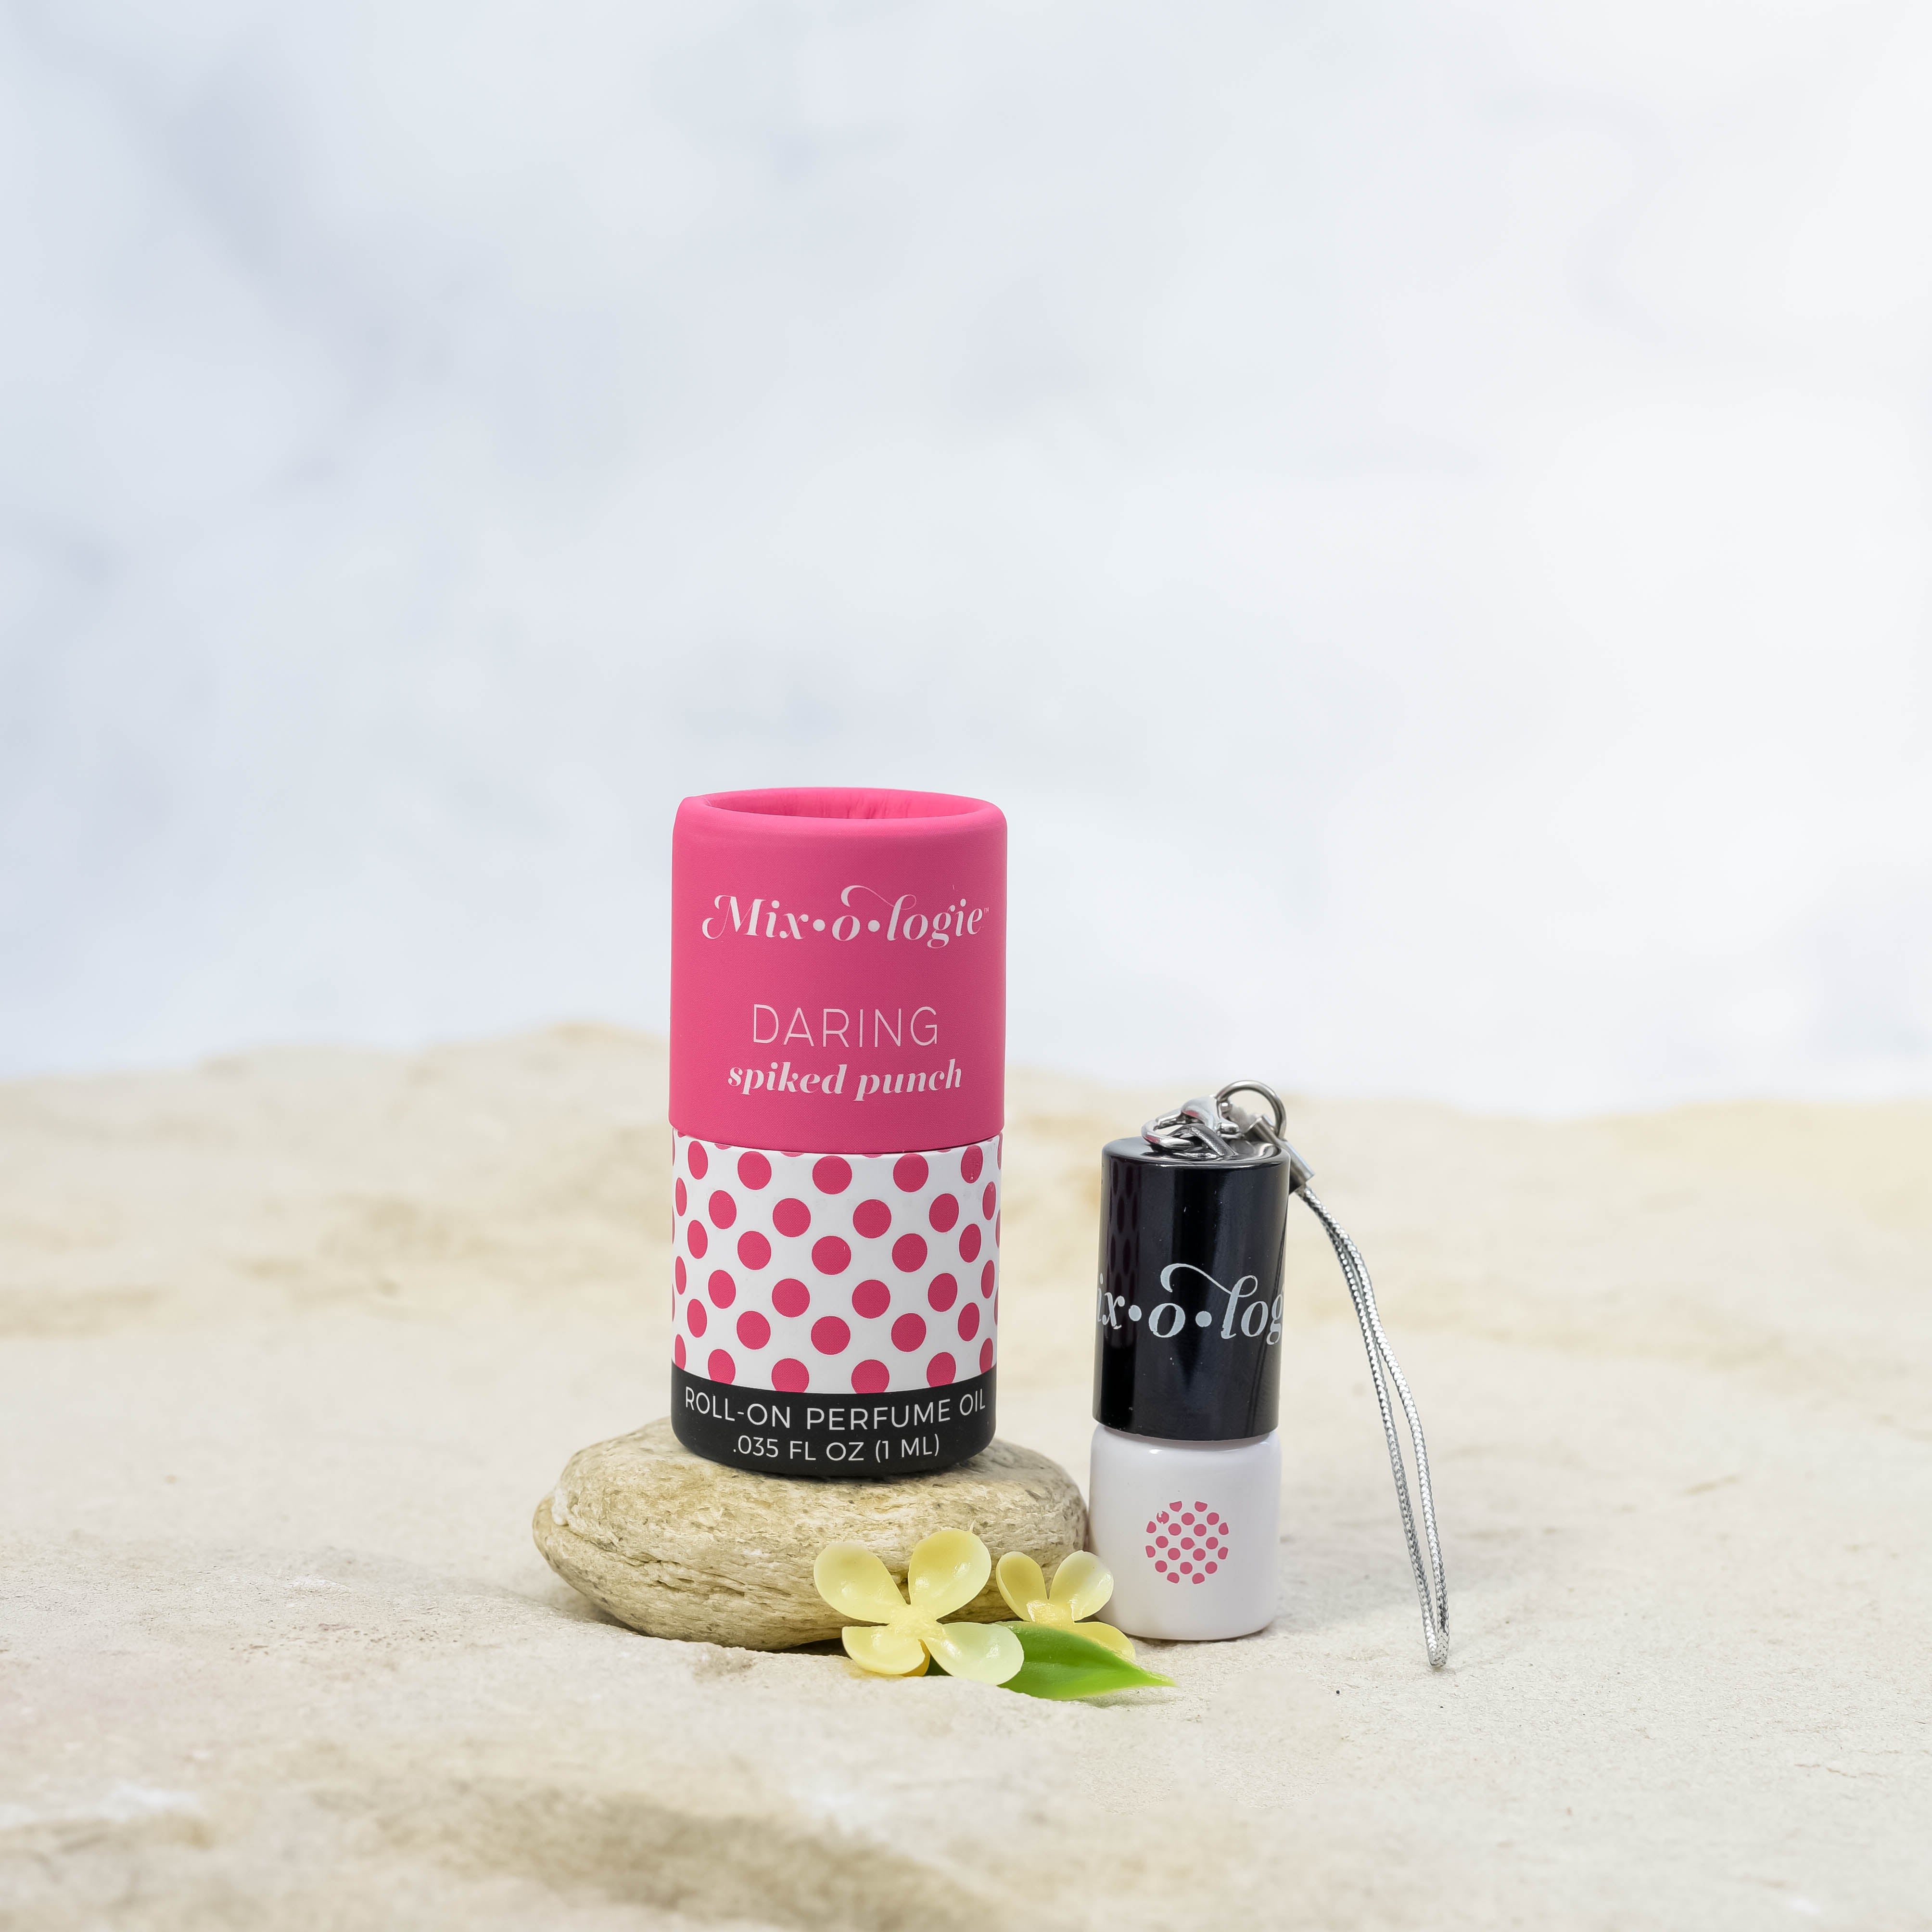 Daring (Spiked Punch) mini white cylinder rollerballs with black top and keychain attachment lid with bright pink polka dots has .035 fl oz or 1 mL.